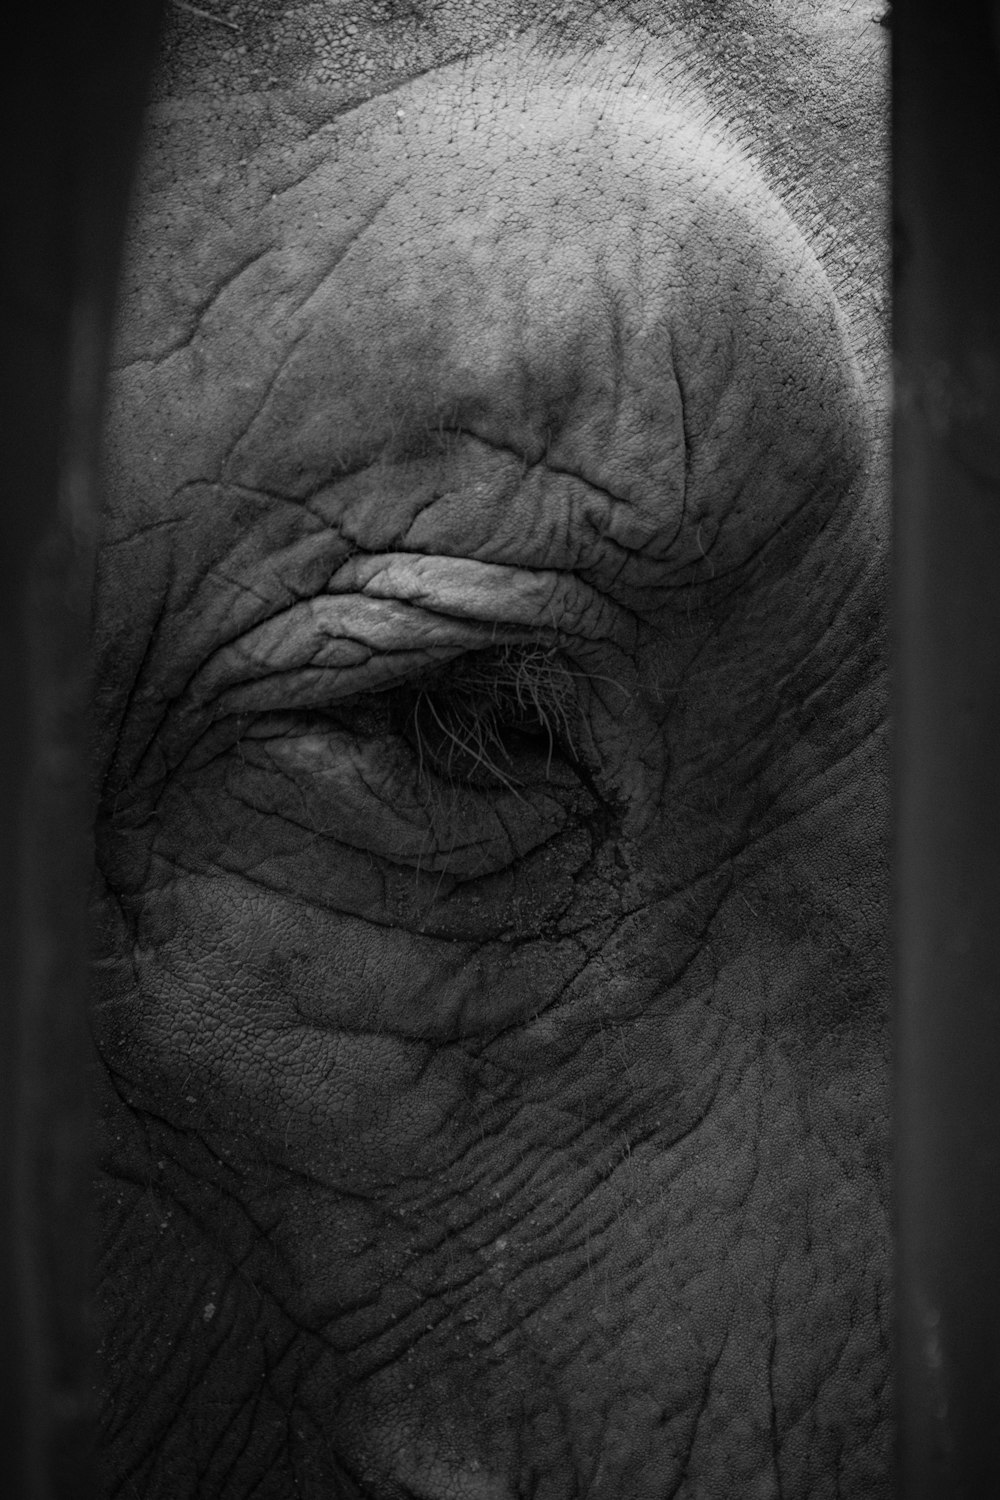 a close up of an elephant's eye with wrinkles